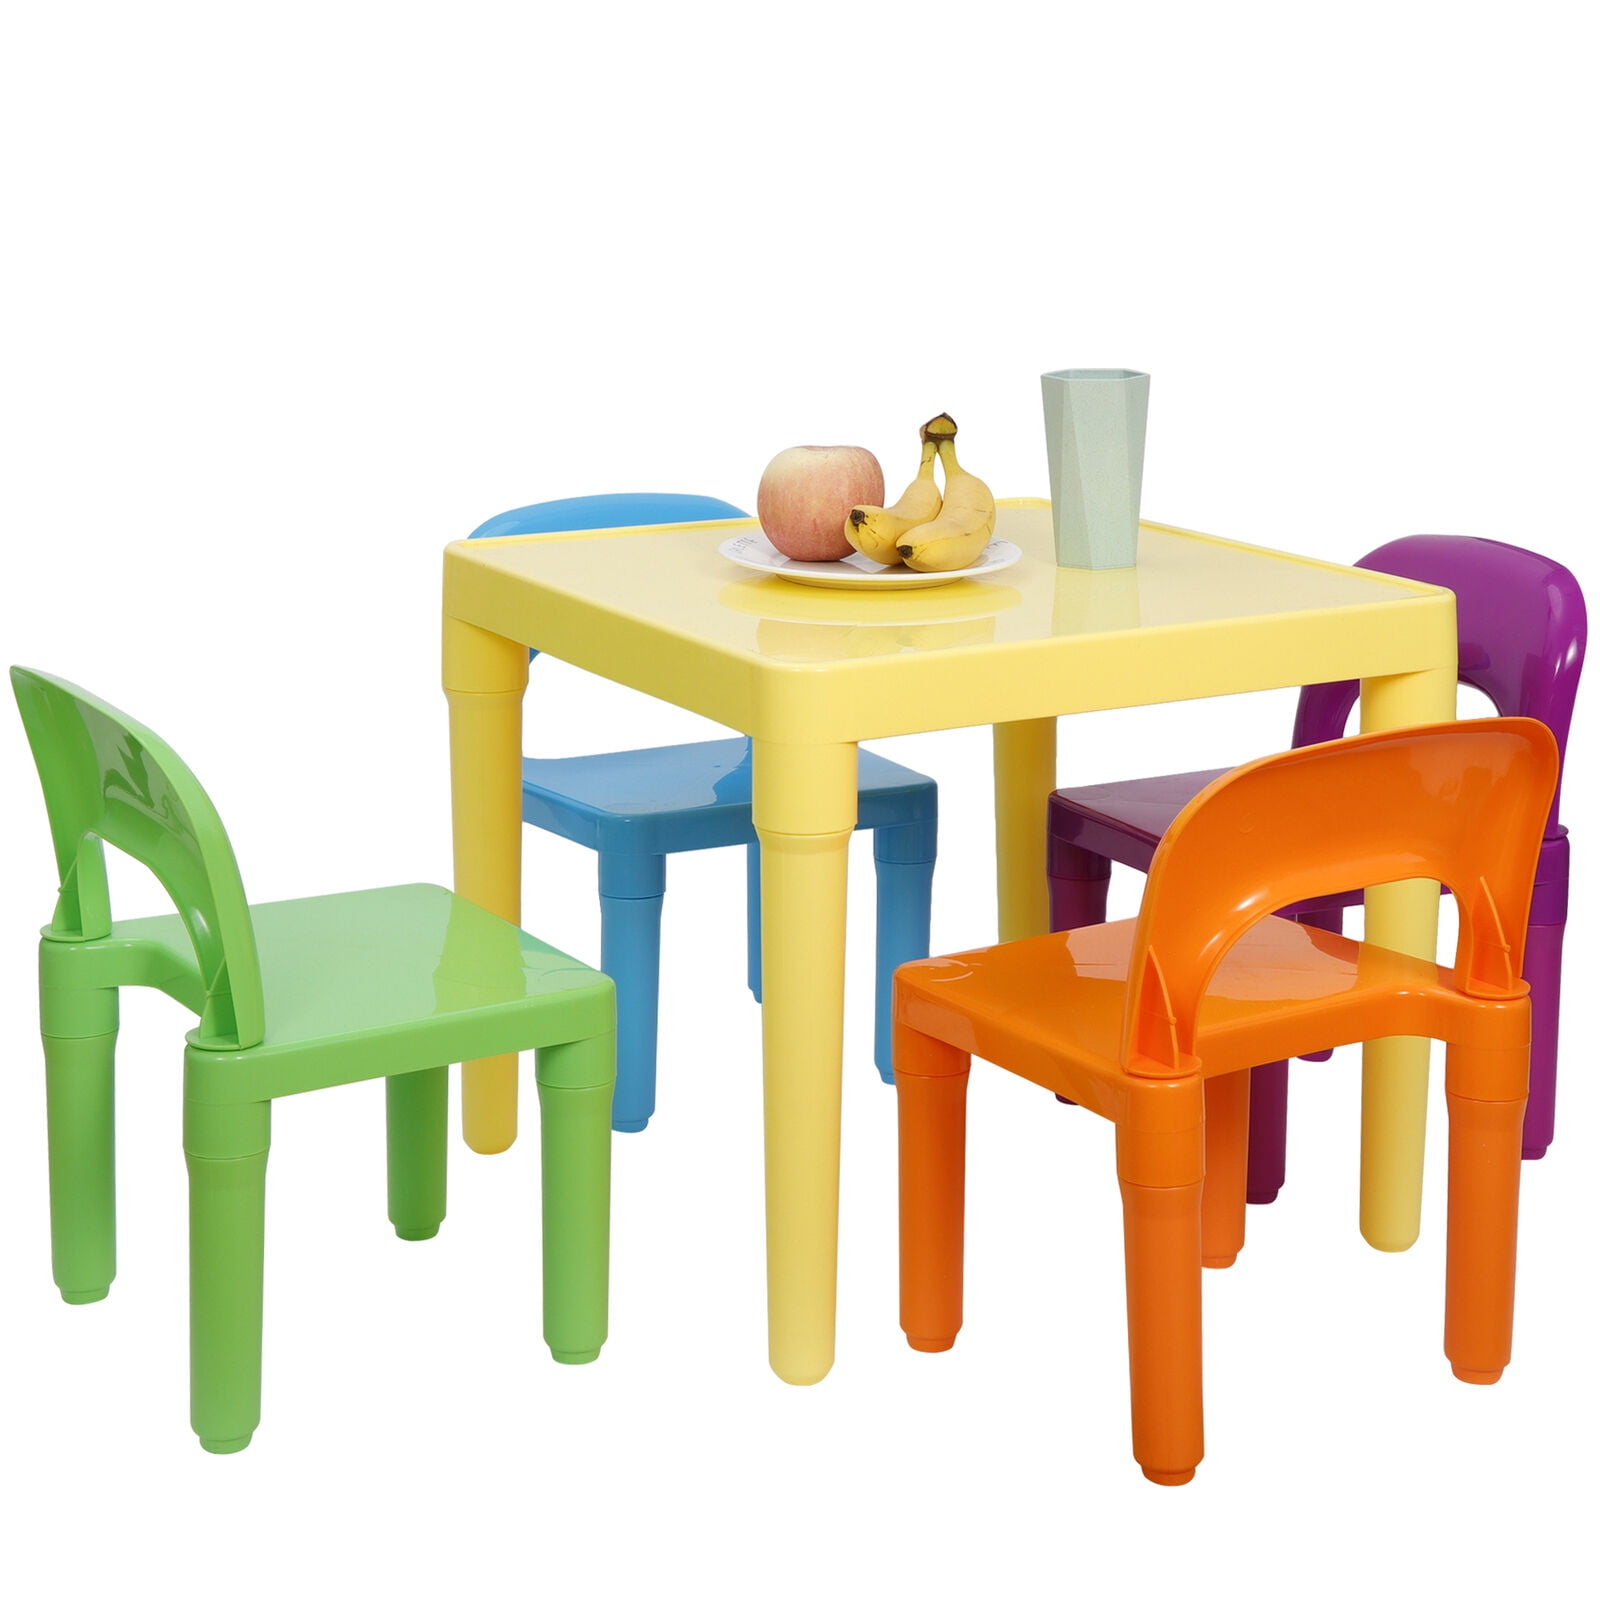 Kids Wood Table and Chairs Play Set Toddler Child Activity Furniture In-Outdoor 